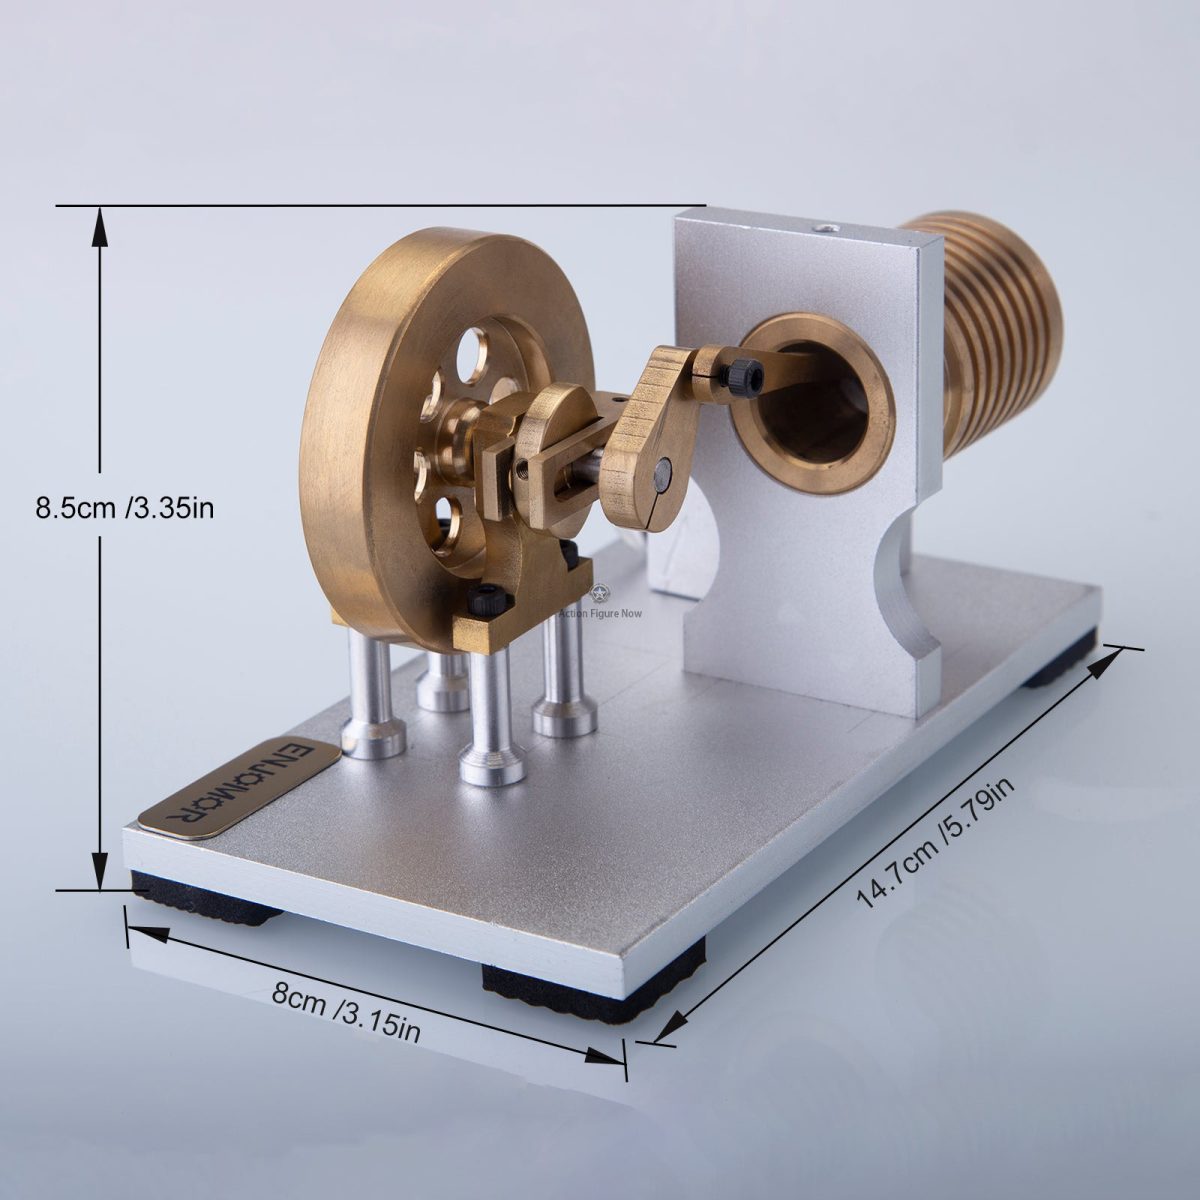 Flame Eater Stirling Engine: External Combustion Engine, Thermal Motor, STEM Toy (by Enginediy)